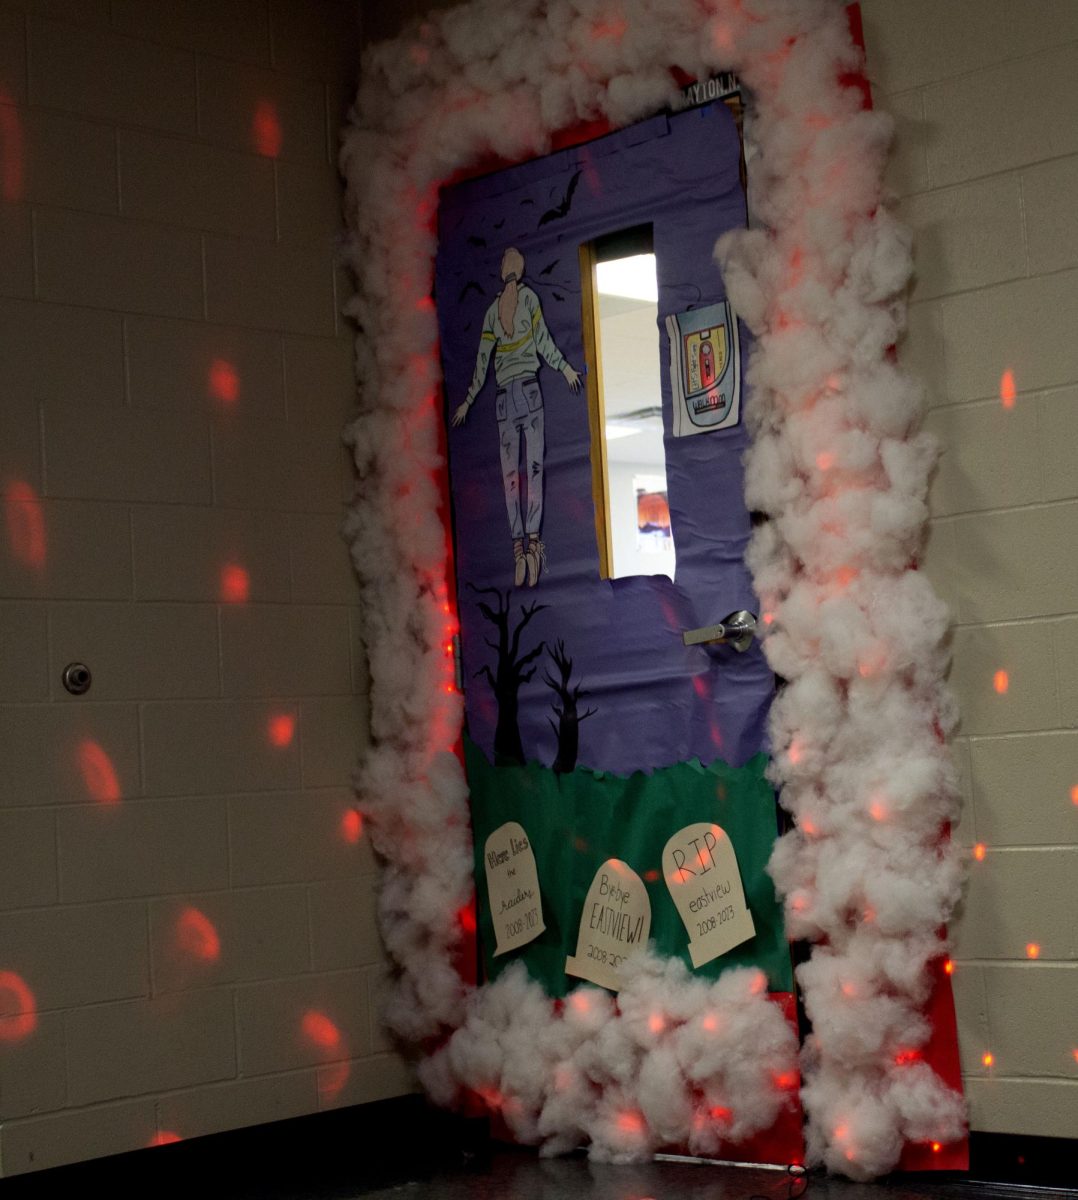 English teacher Nathaniel Braytons Stranger Things themed door won first place in the Homecoming door decoration contest Sept. 8.